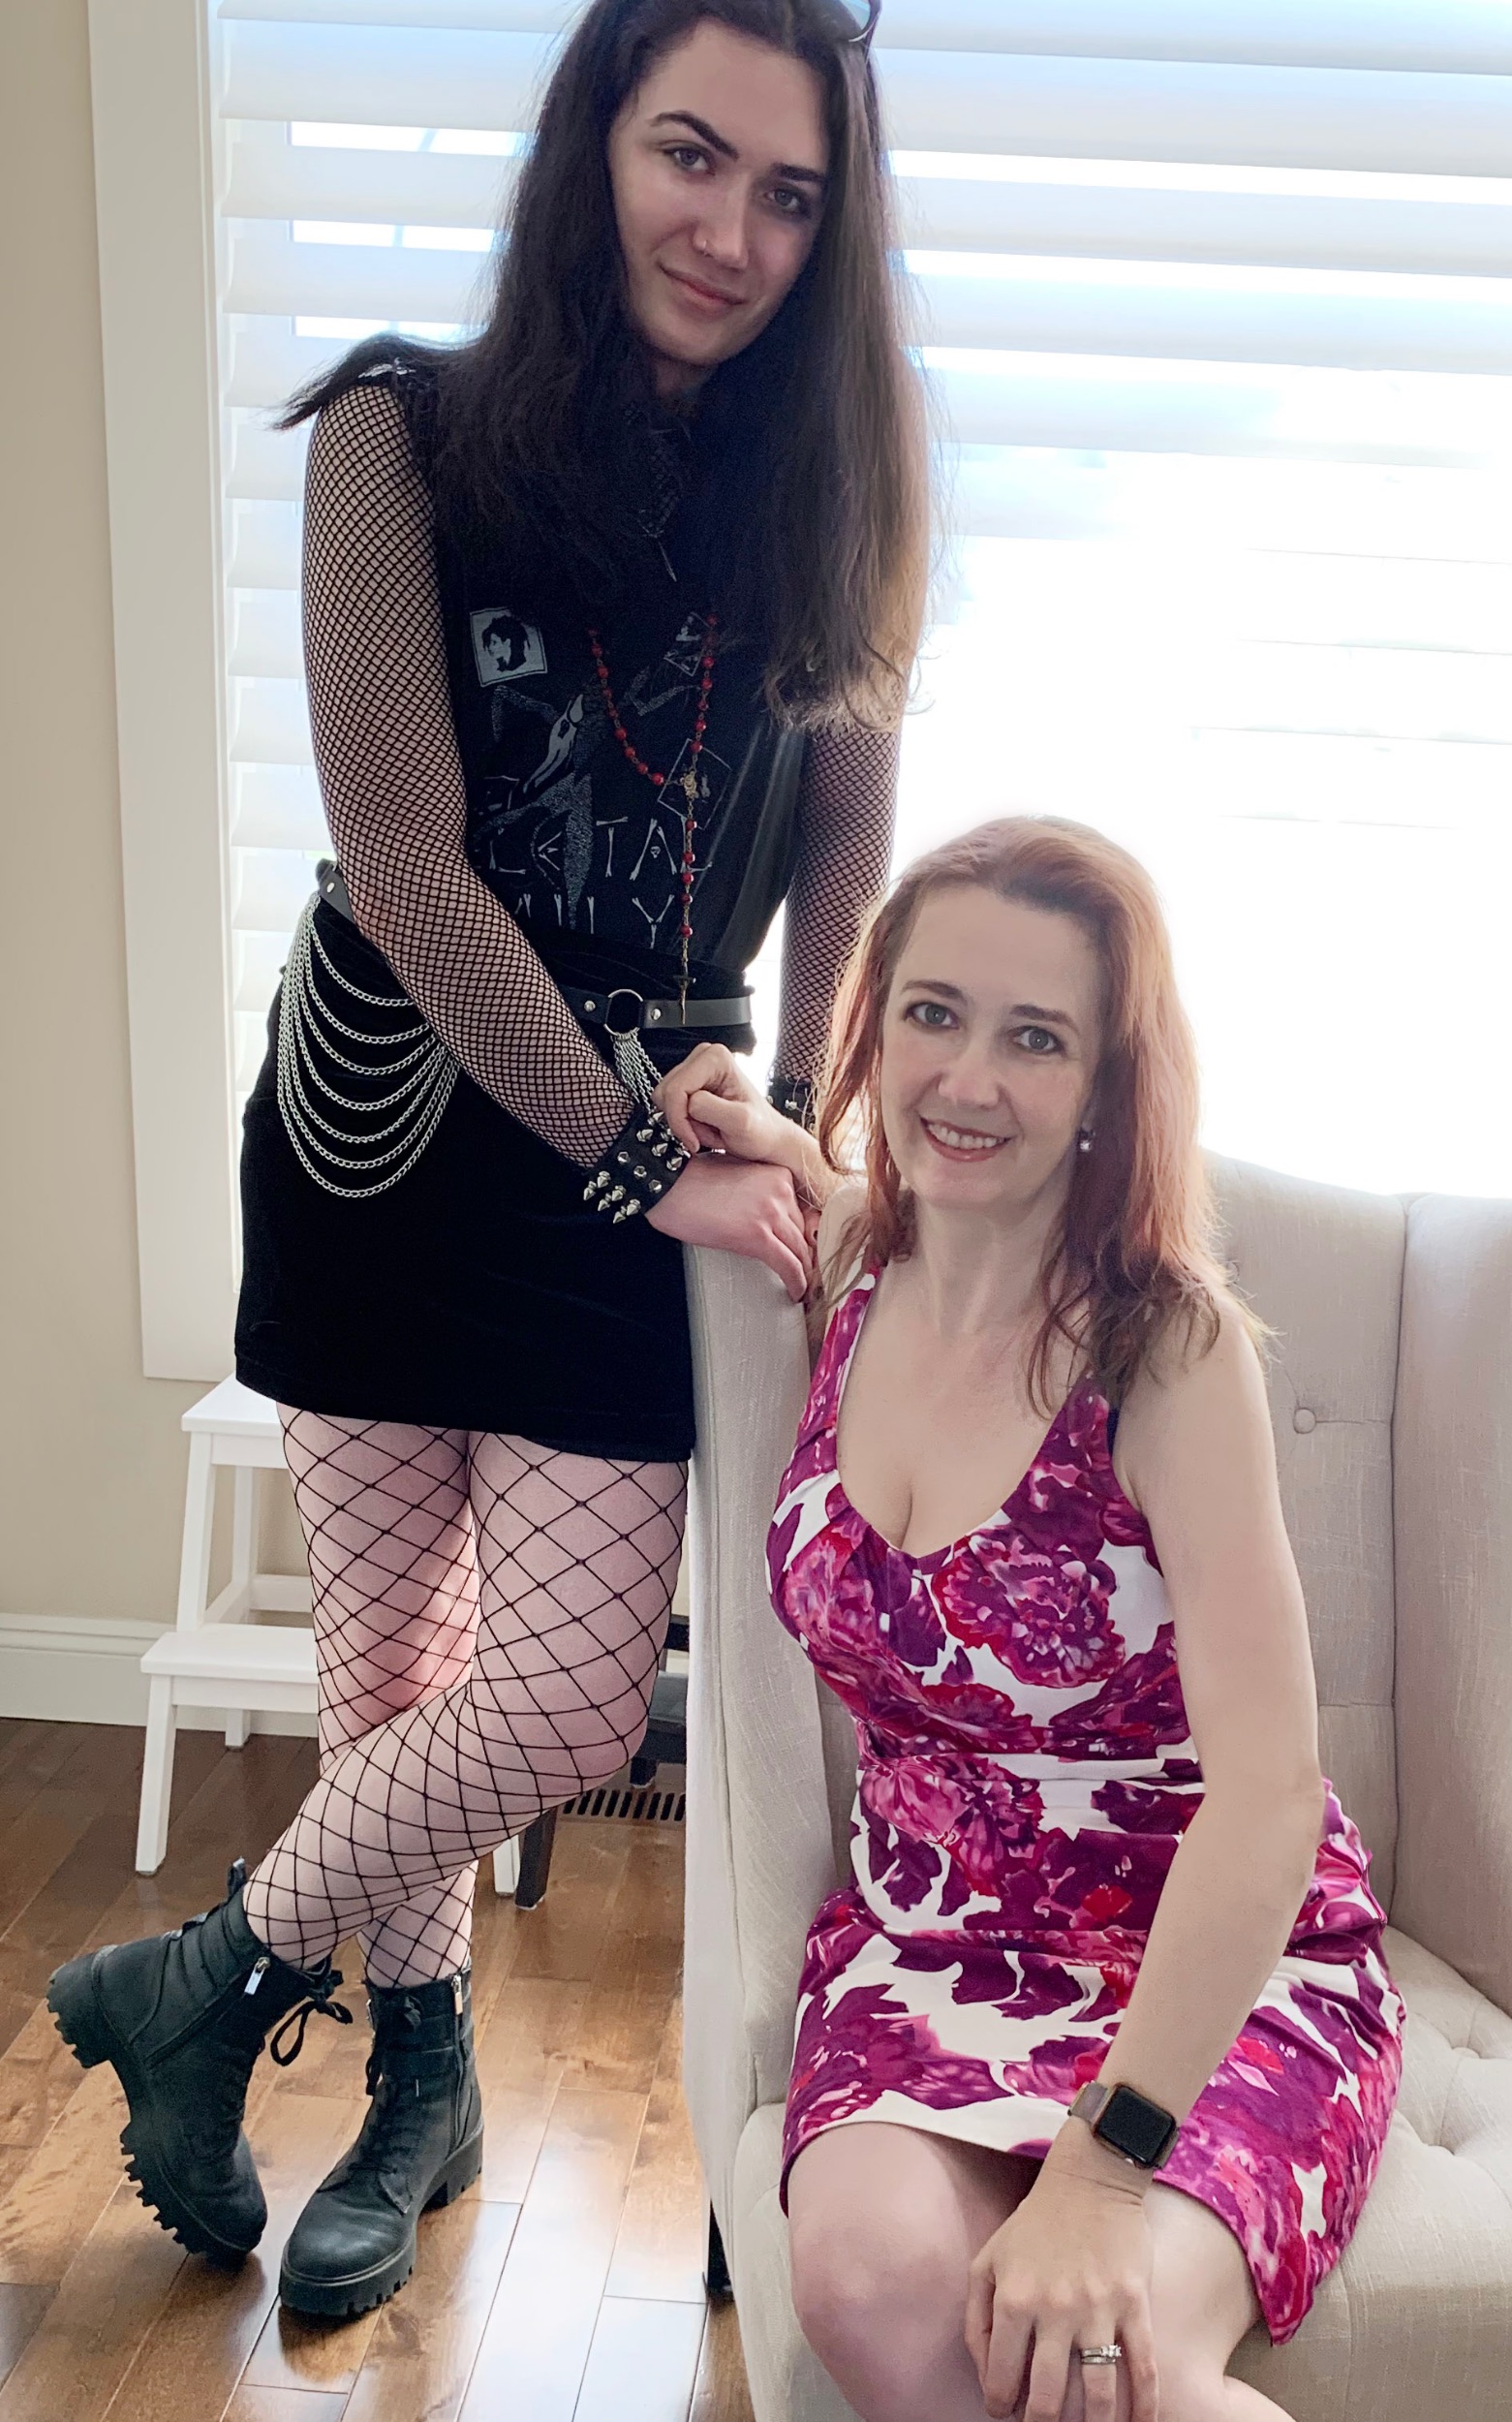 Lydia in goth clothes standing beside a seated Rhiannon in a hot pink floral dress